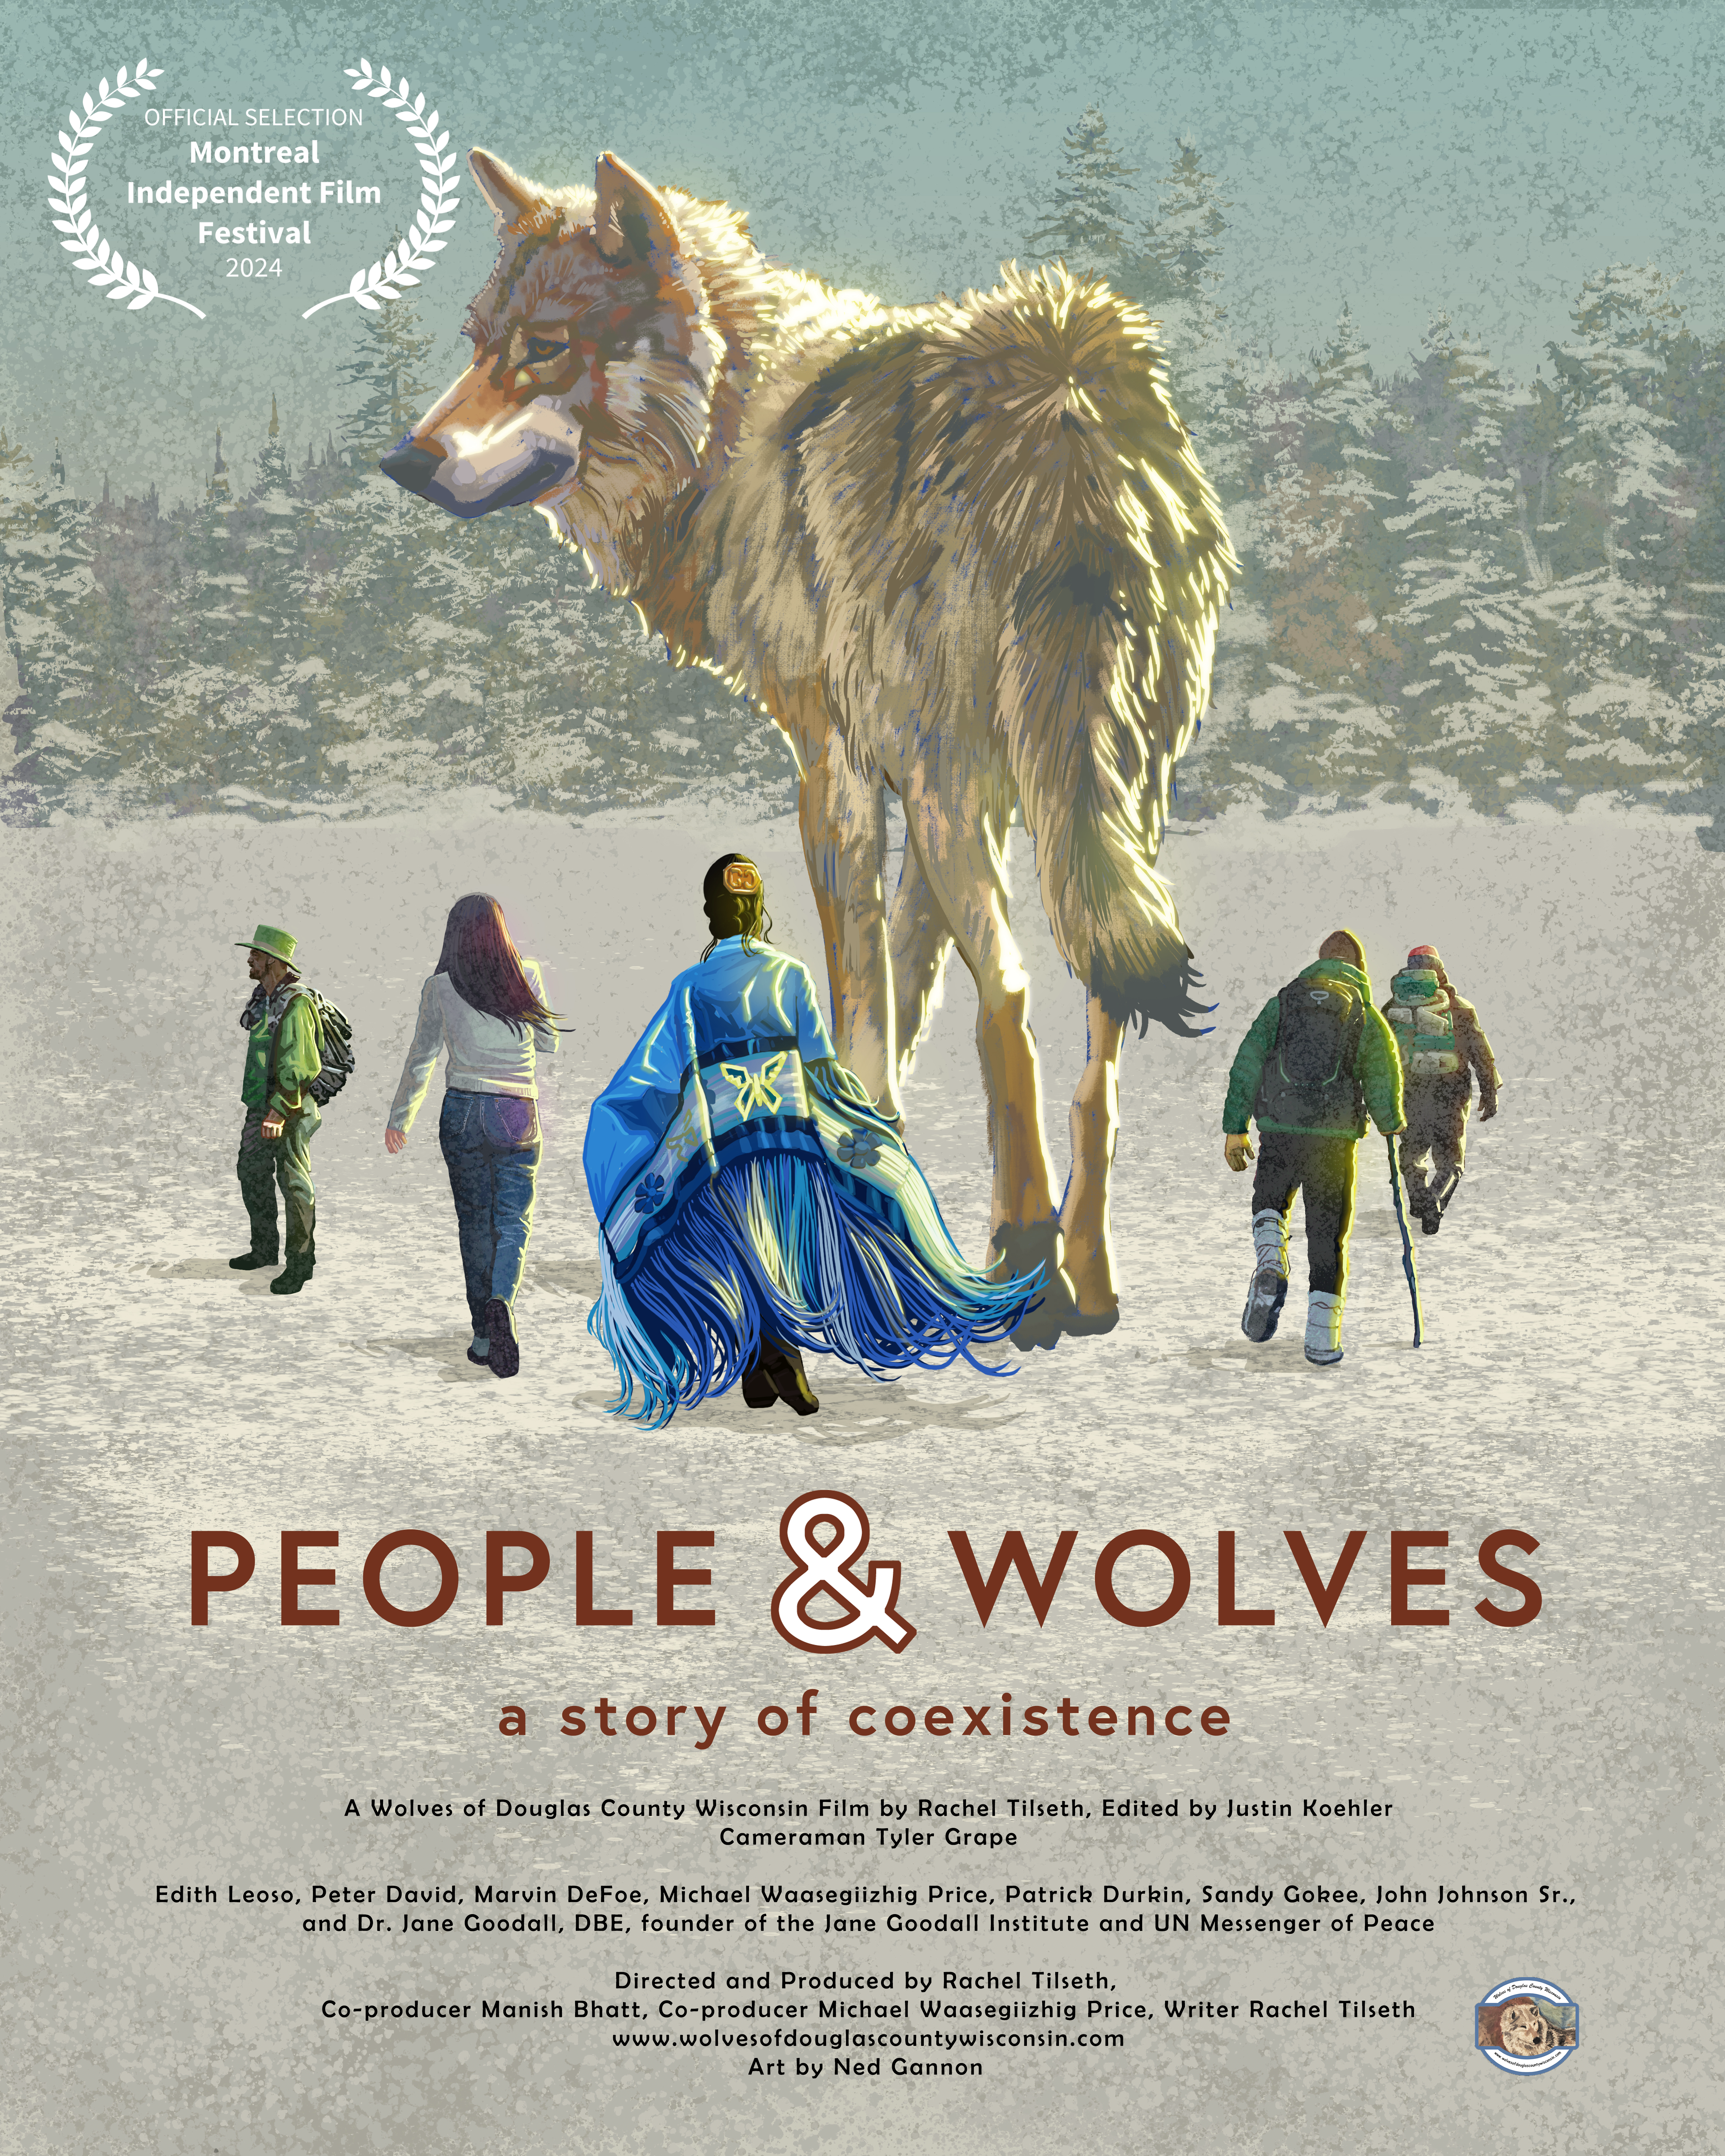 People and Wolves Selected Best Short Documentary Winter 2024 Seasonal
Winner at the Montreal Independent Film Festival